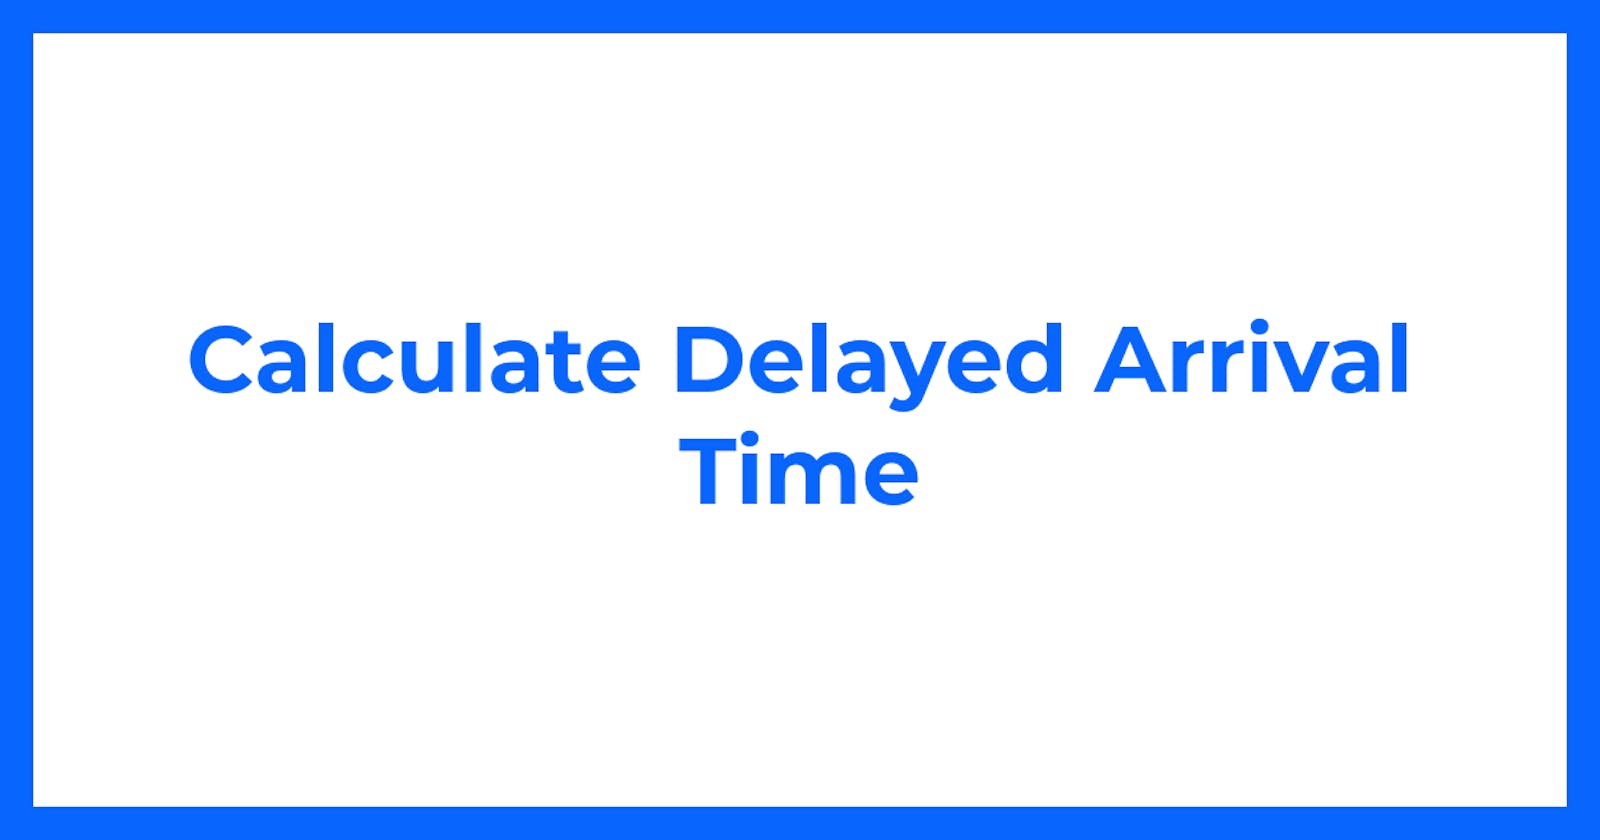 Calculate Delayed Arrival Time